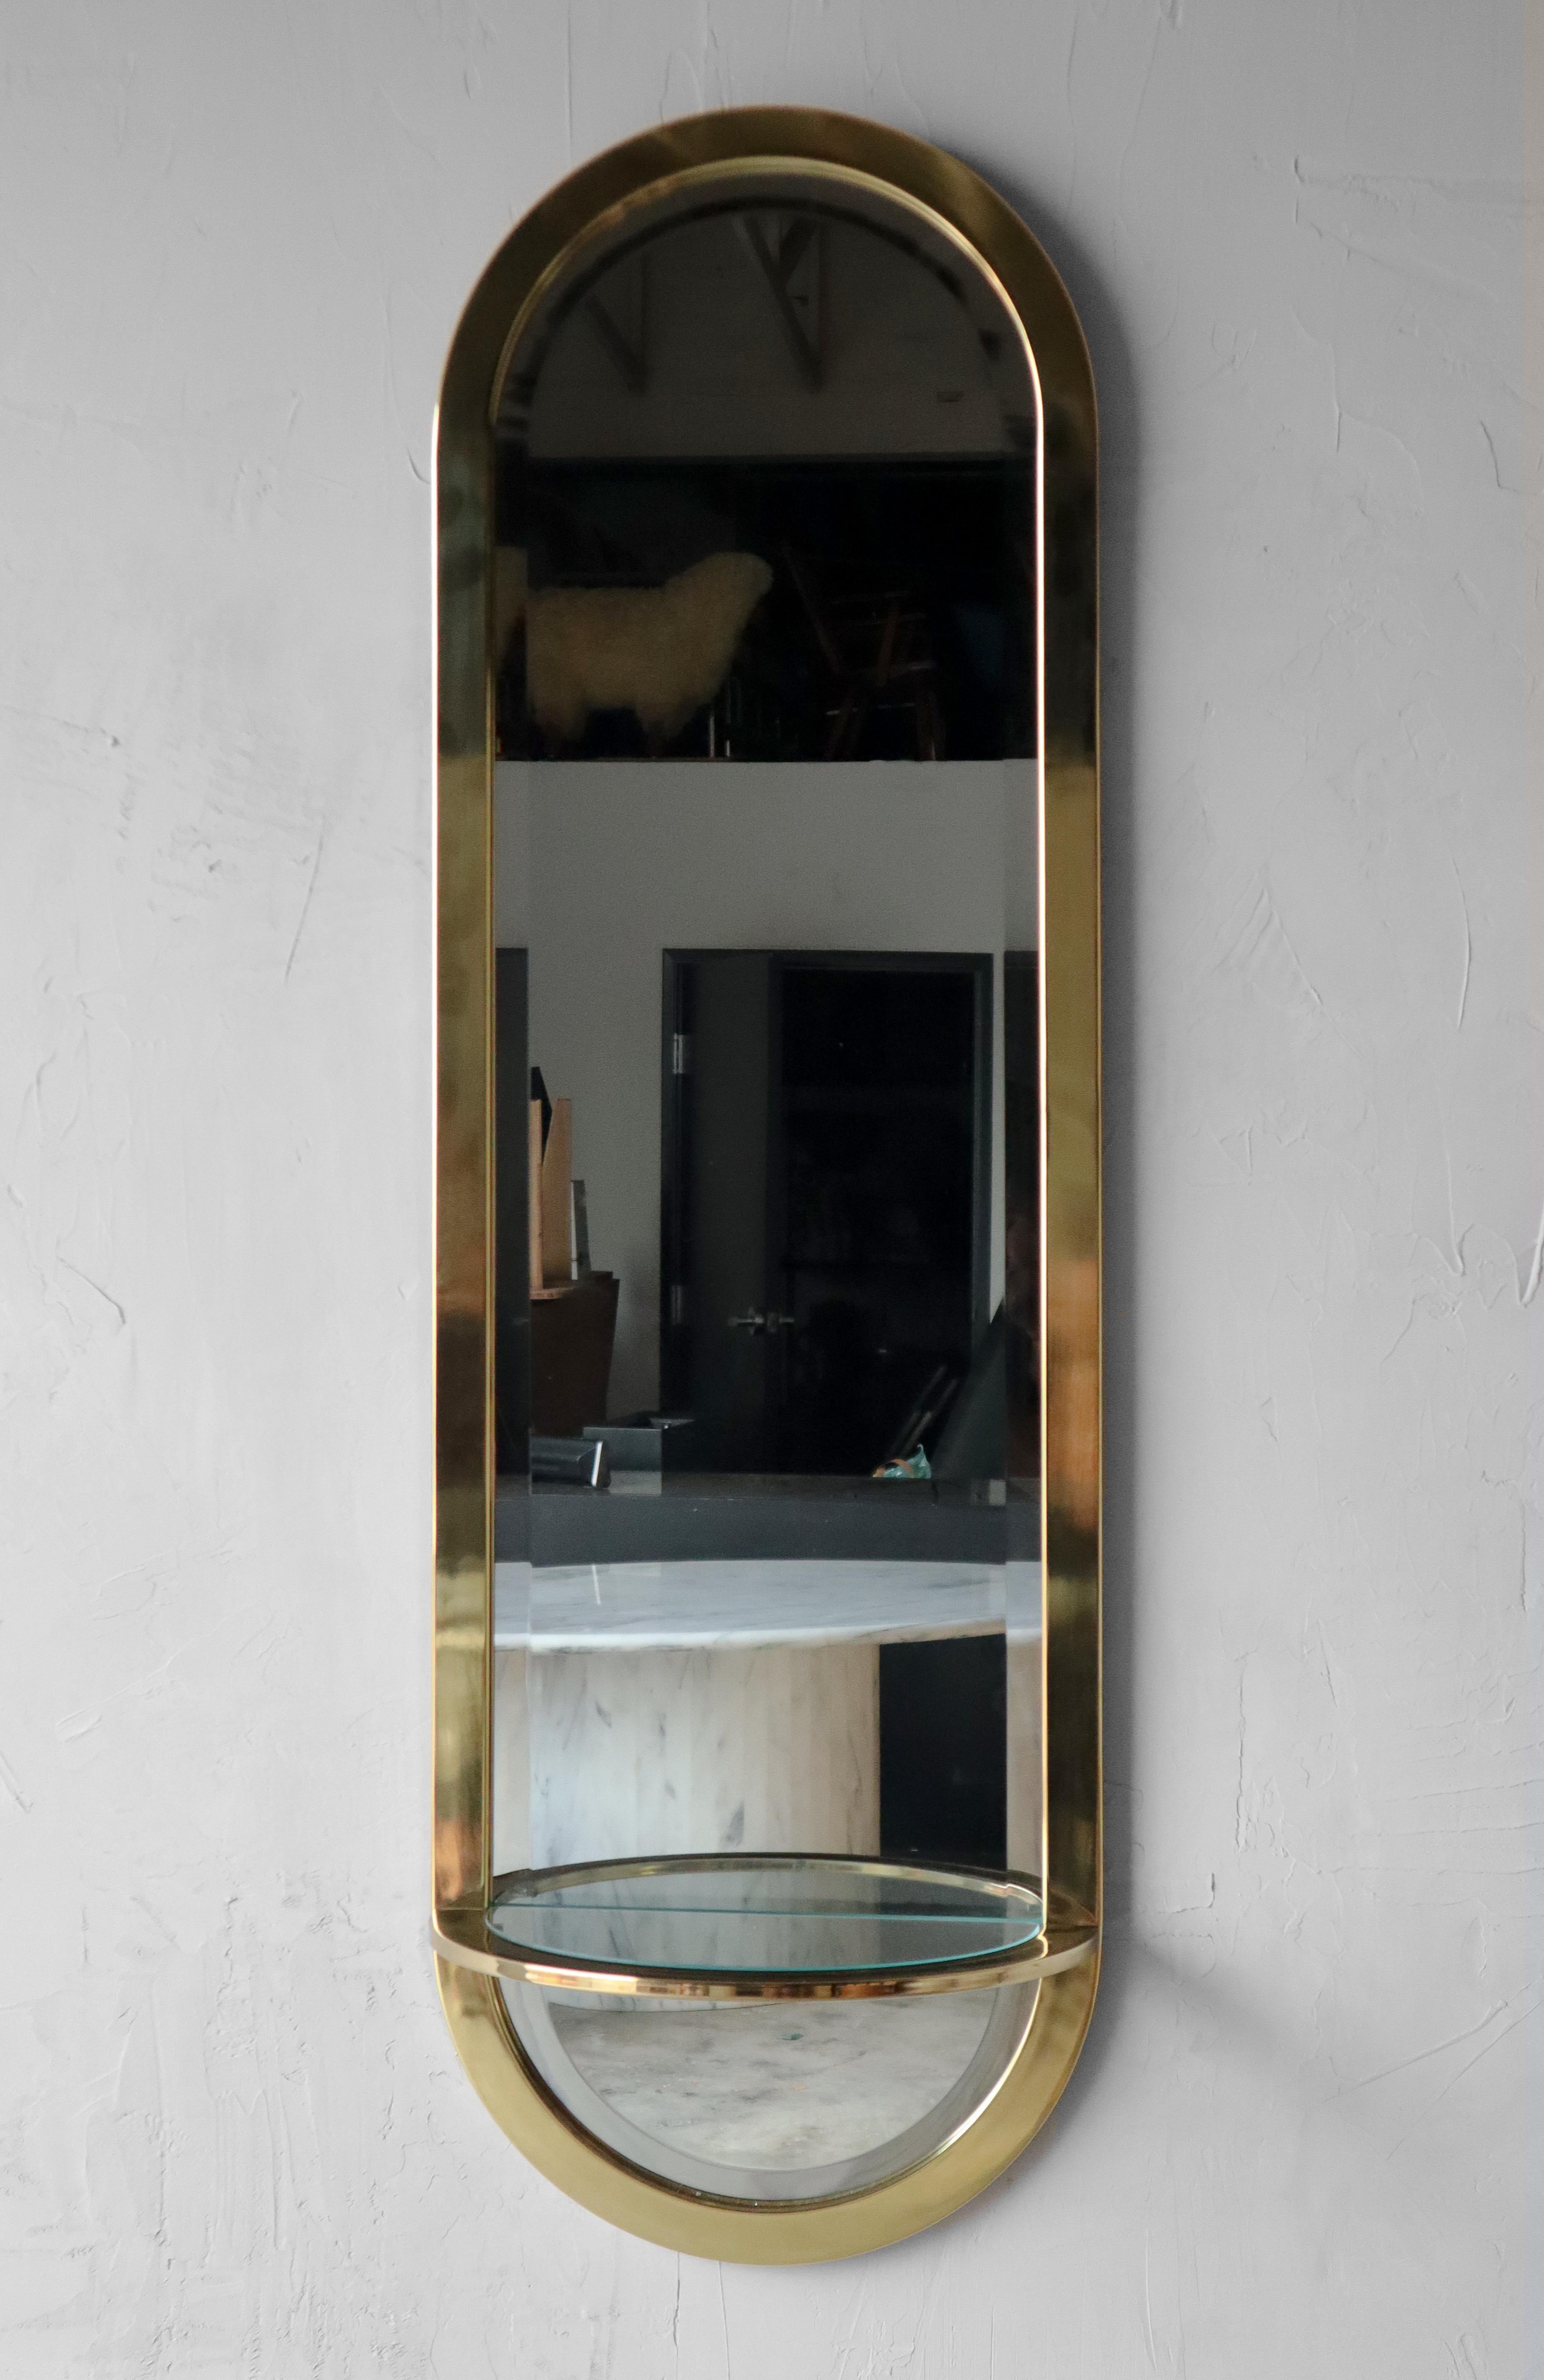 Beautiful Mid-Century Modern brass racetrack wall mirror with a demilune glass shelf, by Pace Collection.

Mirror is in excellent condition with no real damage to be noted.